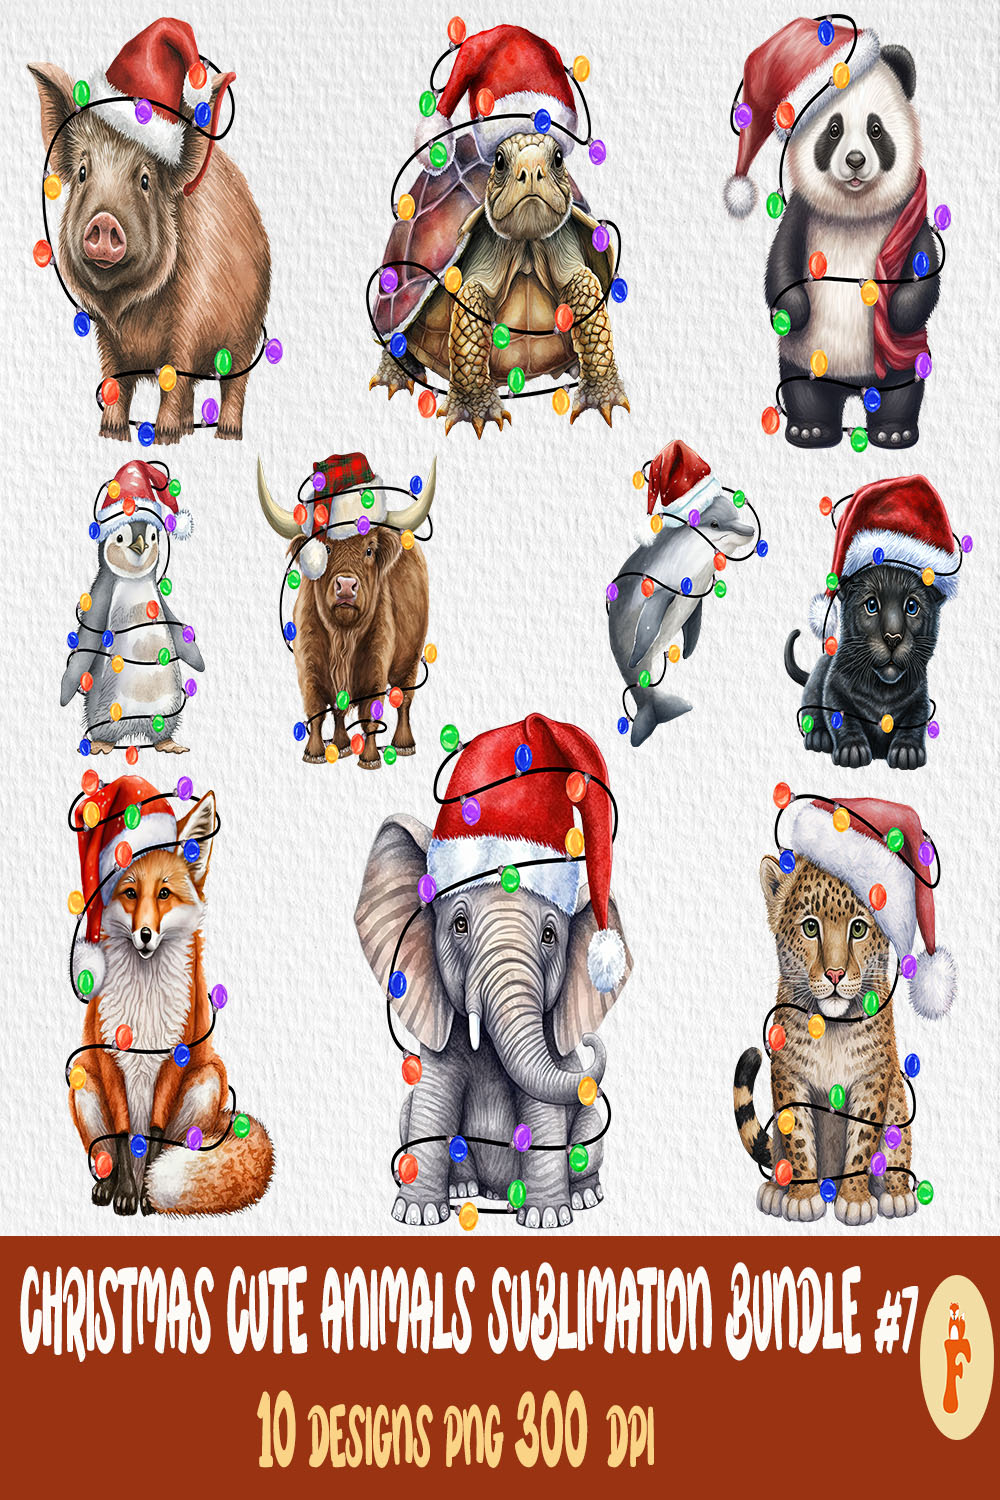 A selection of exquisite images of animals in Christmas clothes.